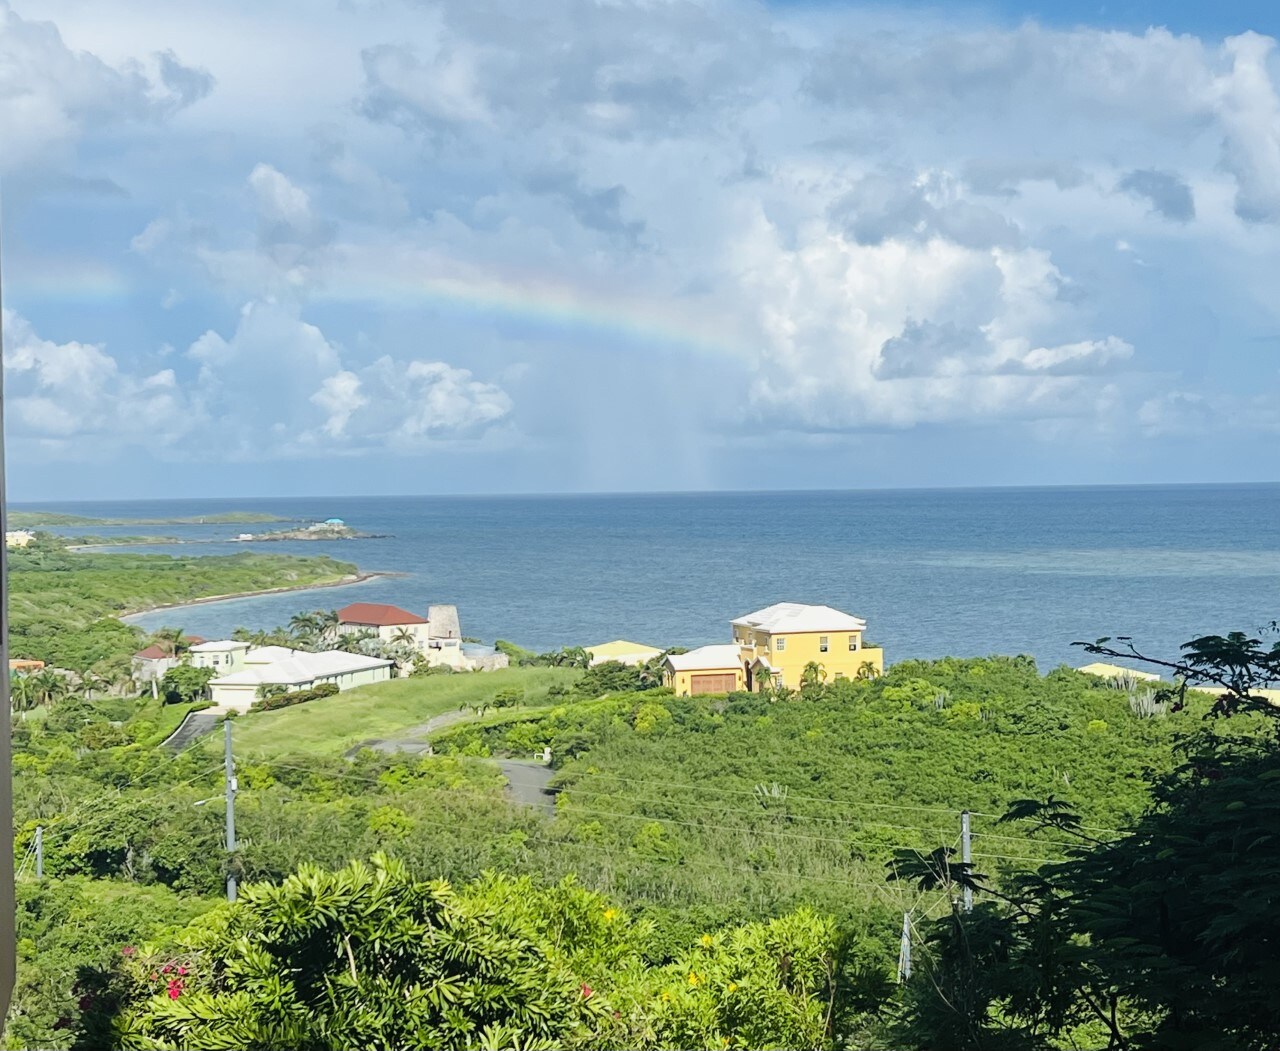 One of the many rainbows you will experience from the balcony of your Vacation Rental!